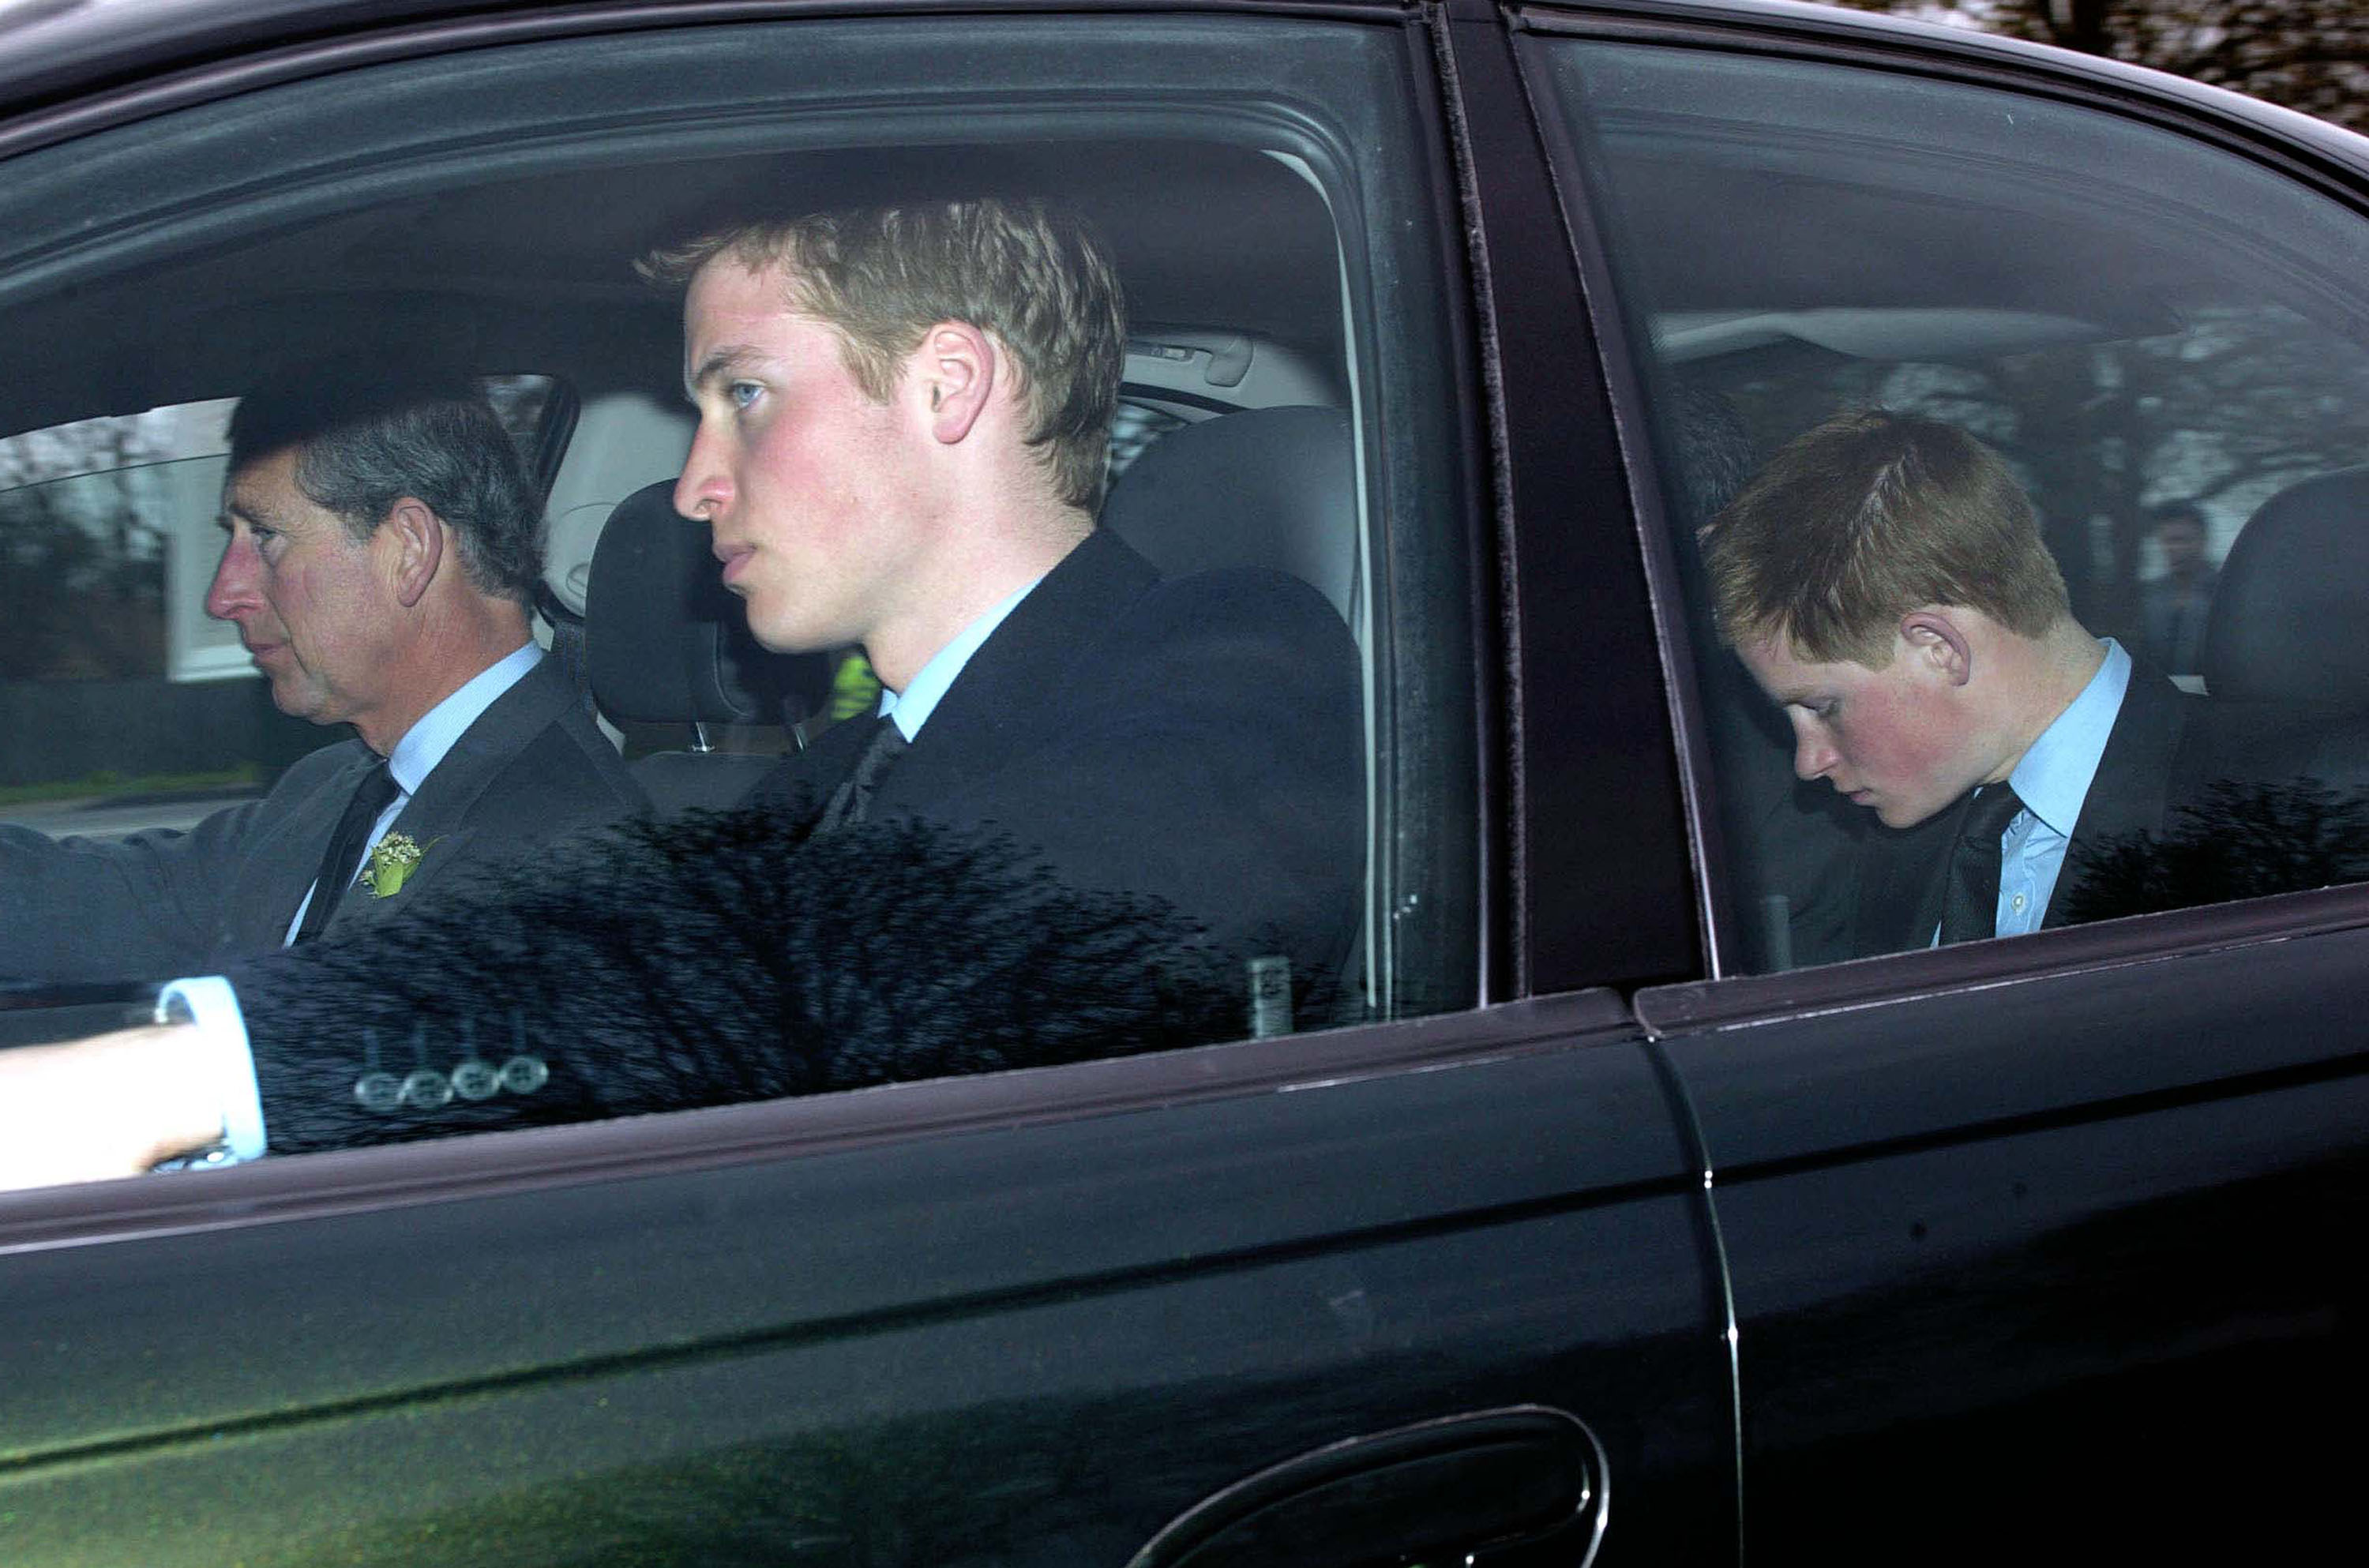 Britain's Prince Charles (L) and his sons Princes William (C) and Harry (R) leaves the Royal Chapel of All Saints in Windsor March 31, 2002 | Photo: Getty Images